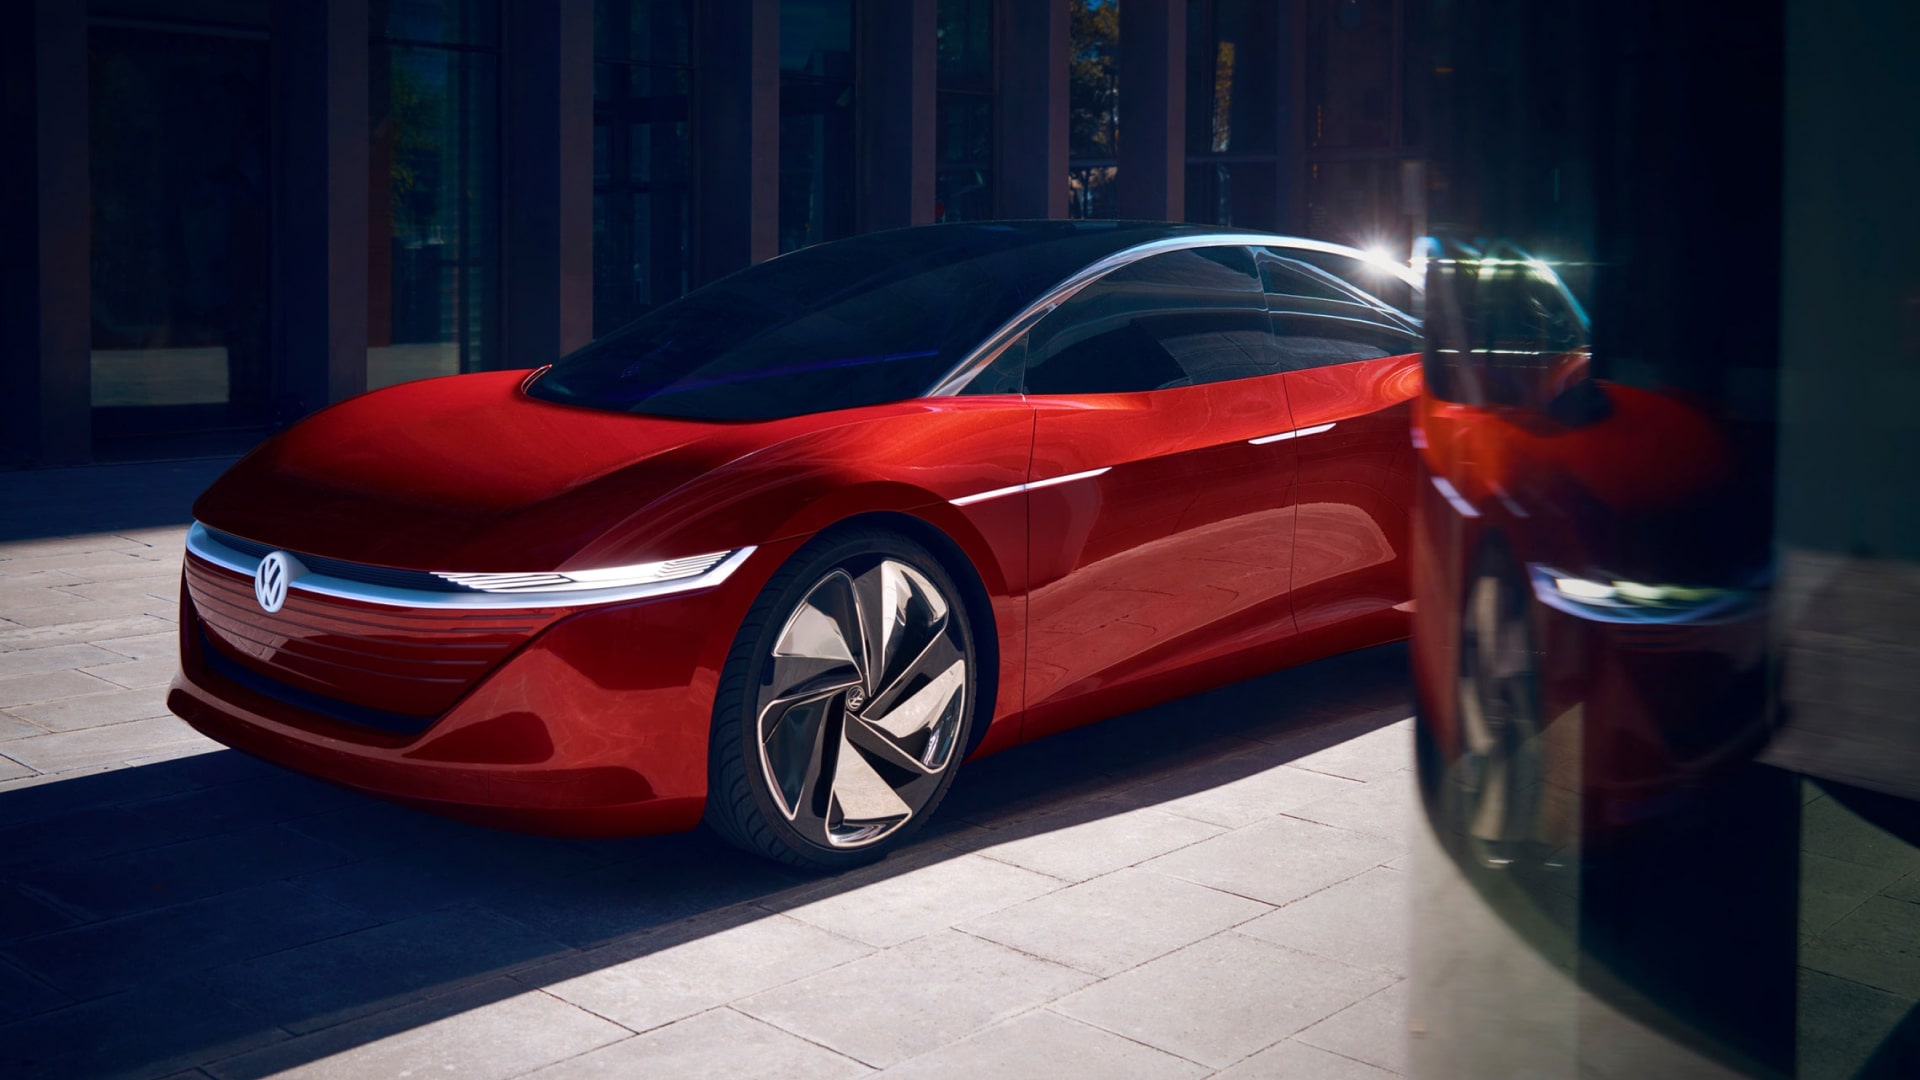 VW concept car in red.